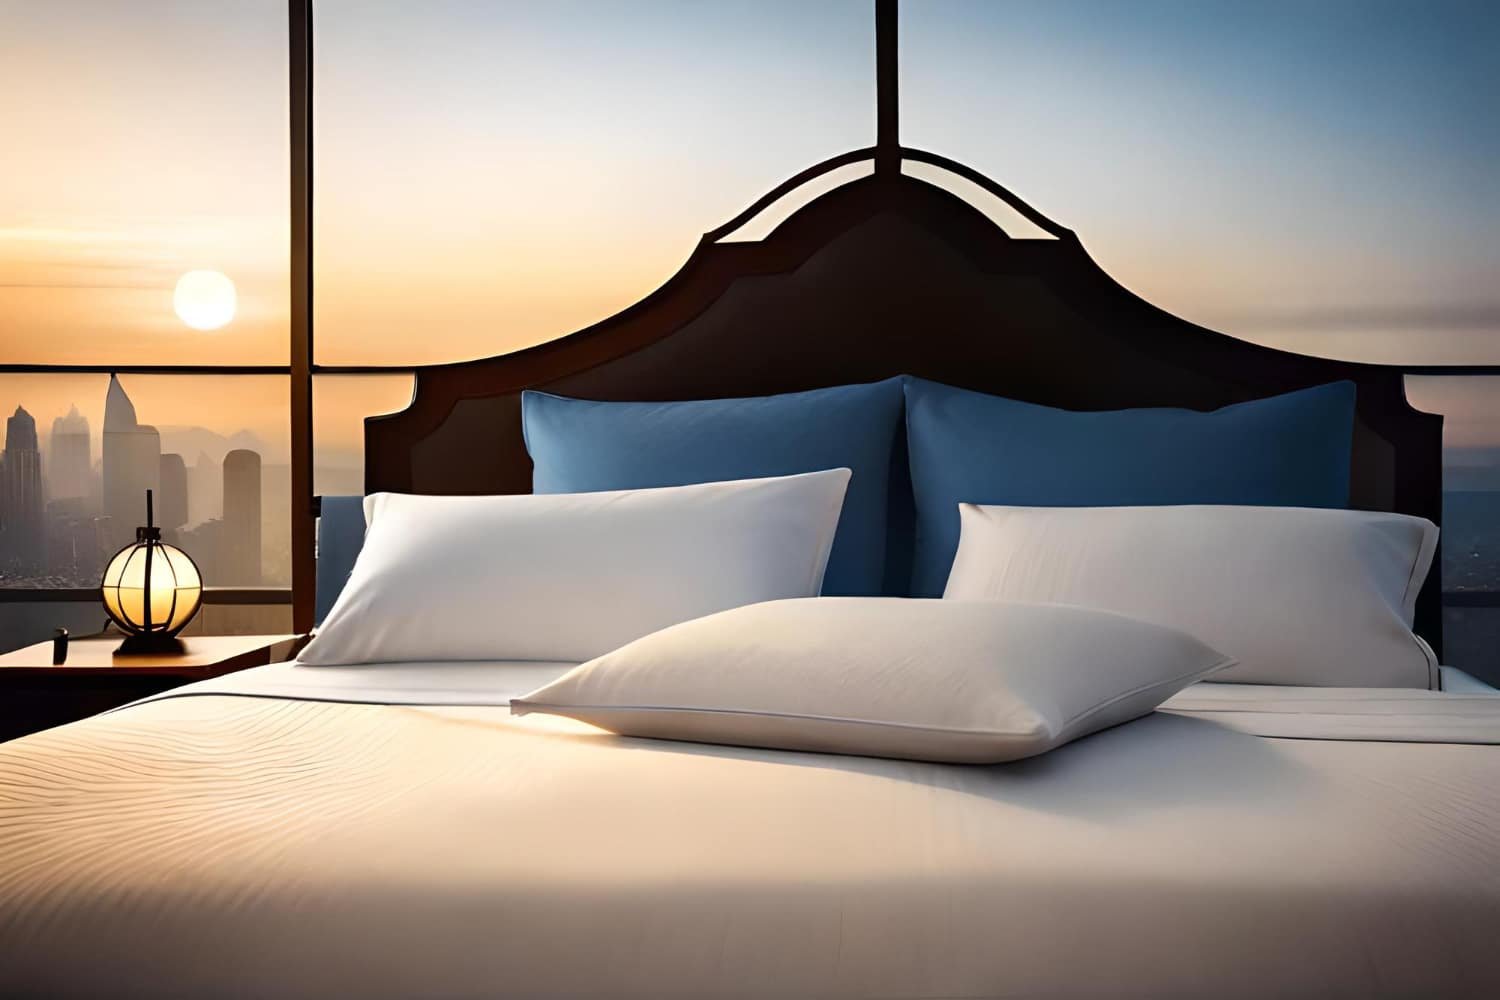 Experience Luxury Bedding With Pure Parima’s Egyptian Cotton Sheets